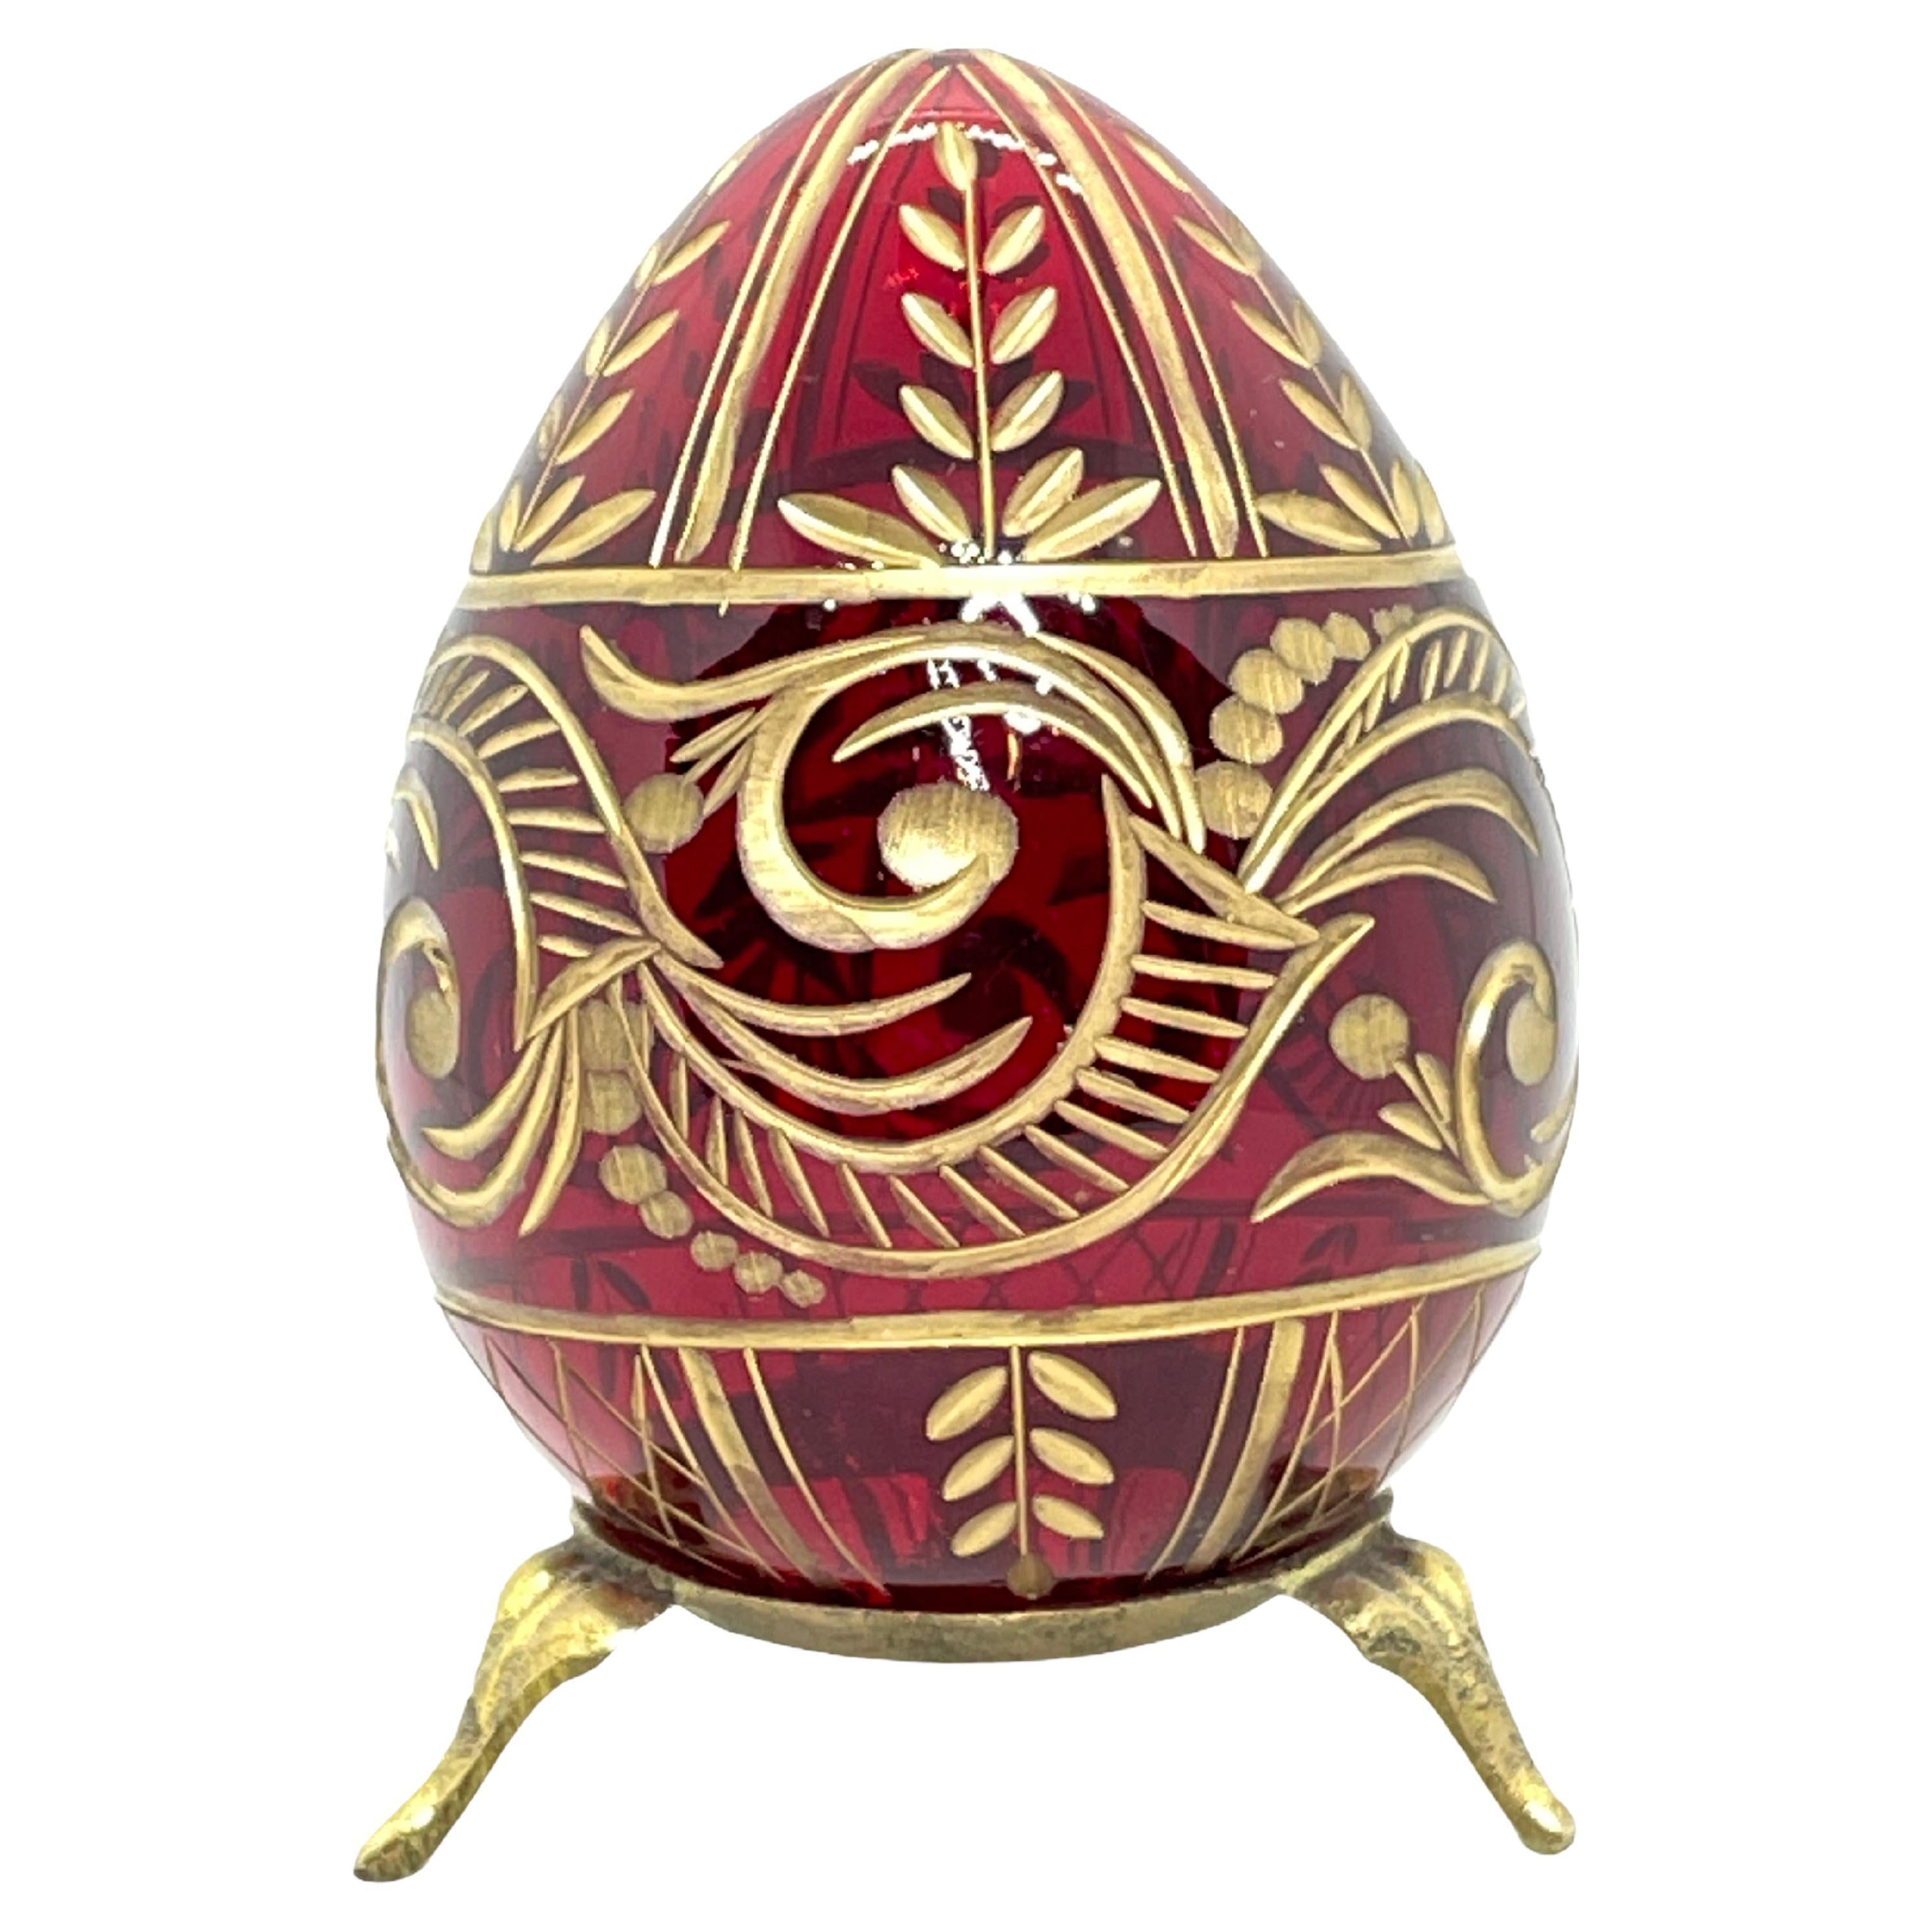 Vintage Faberge Russia Style Ruby Red Glass Egg with Etched Decorations